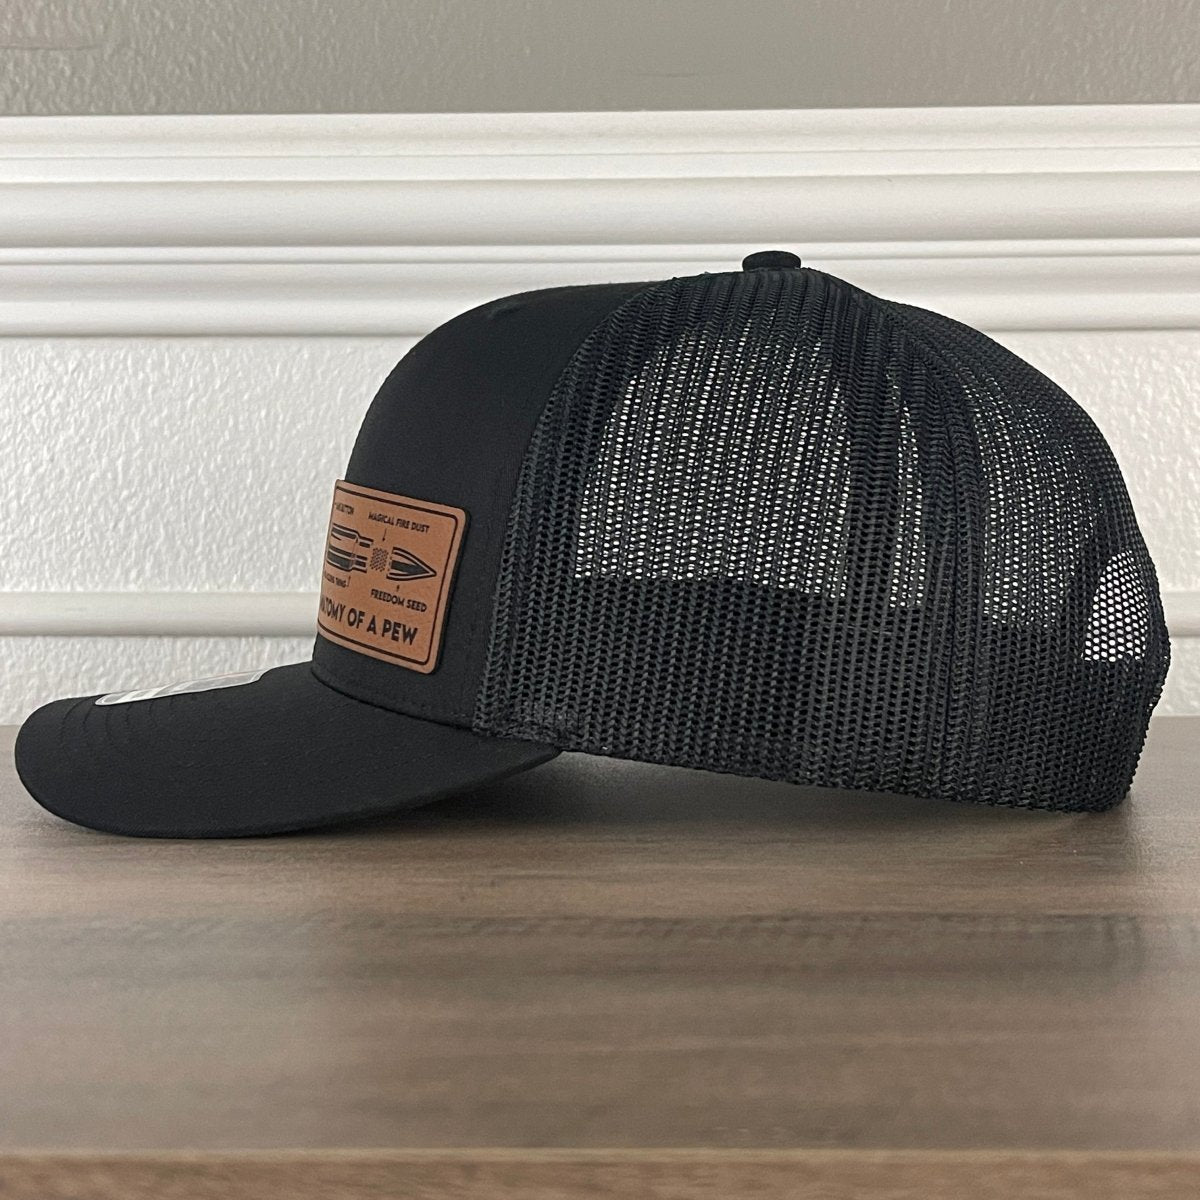 The Anatomy Of A PEW Side Leather Patch Hat Black Patch Hat - VividEditions